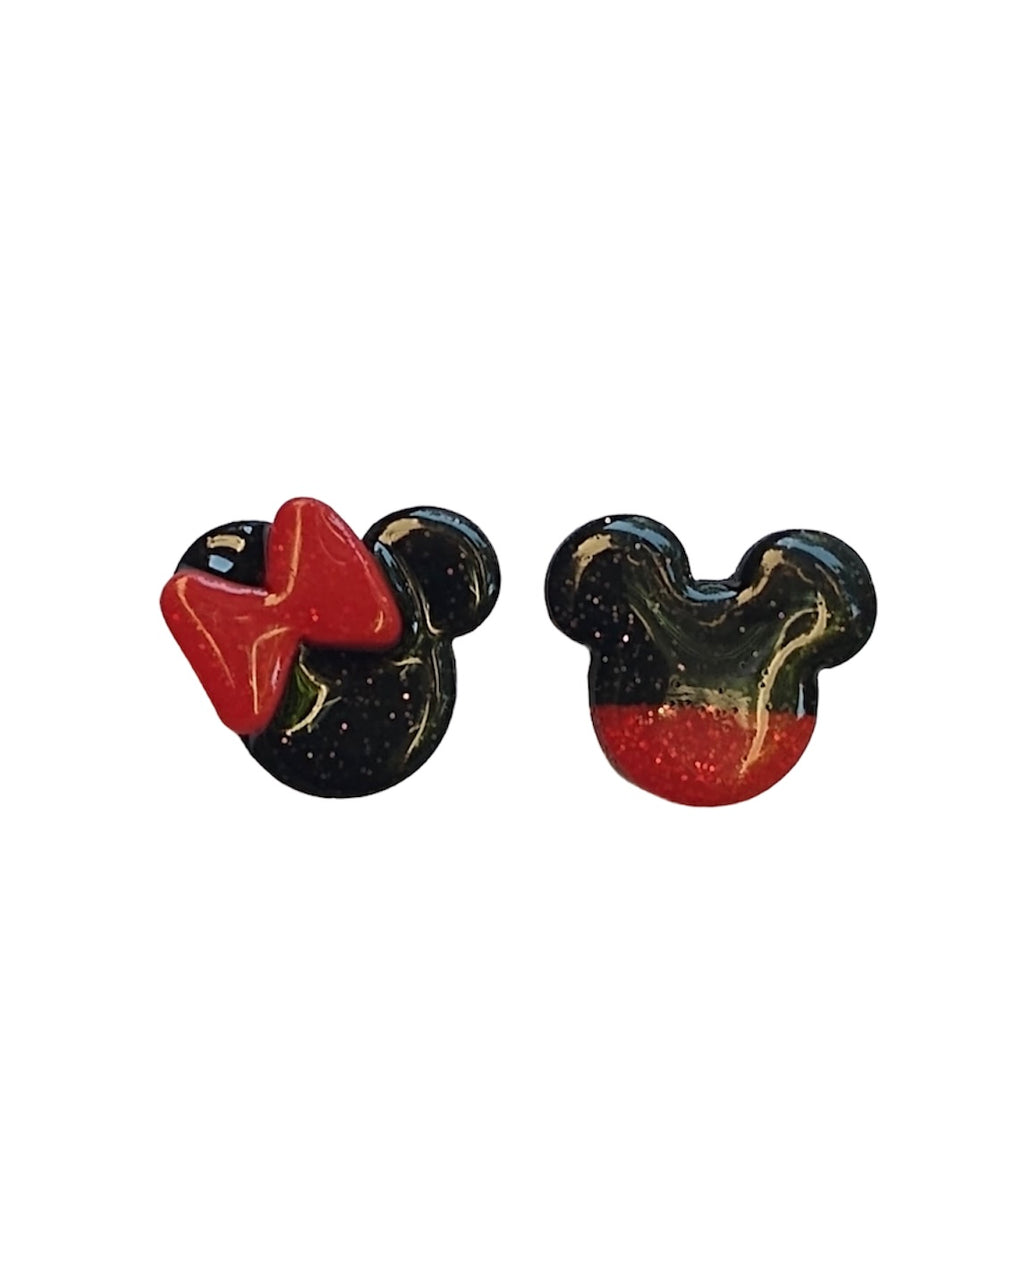 Mickey mouse and minnie mouse earring stud set - ADSO Creations